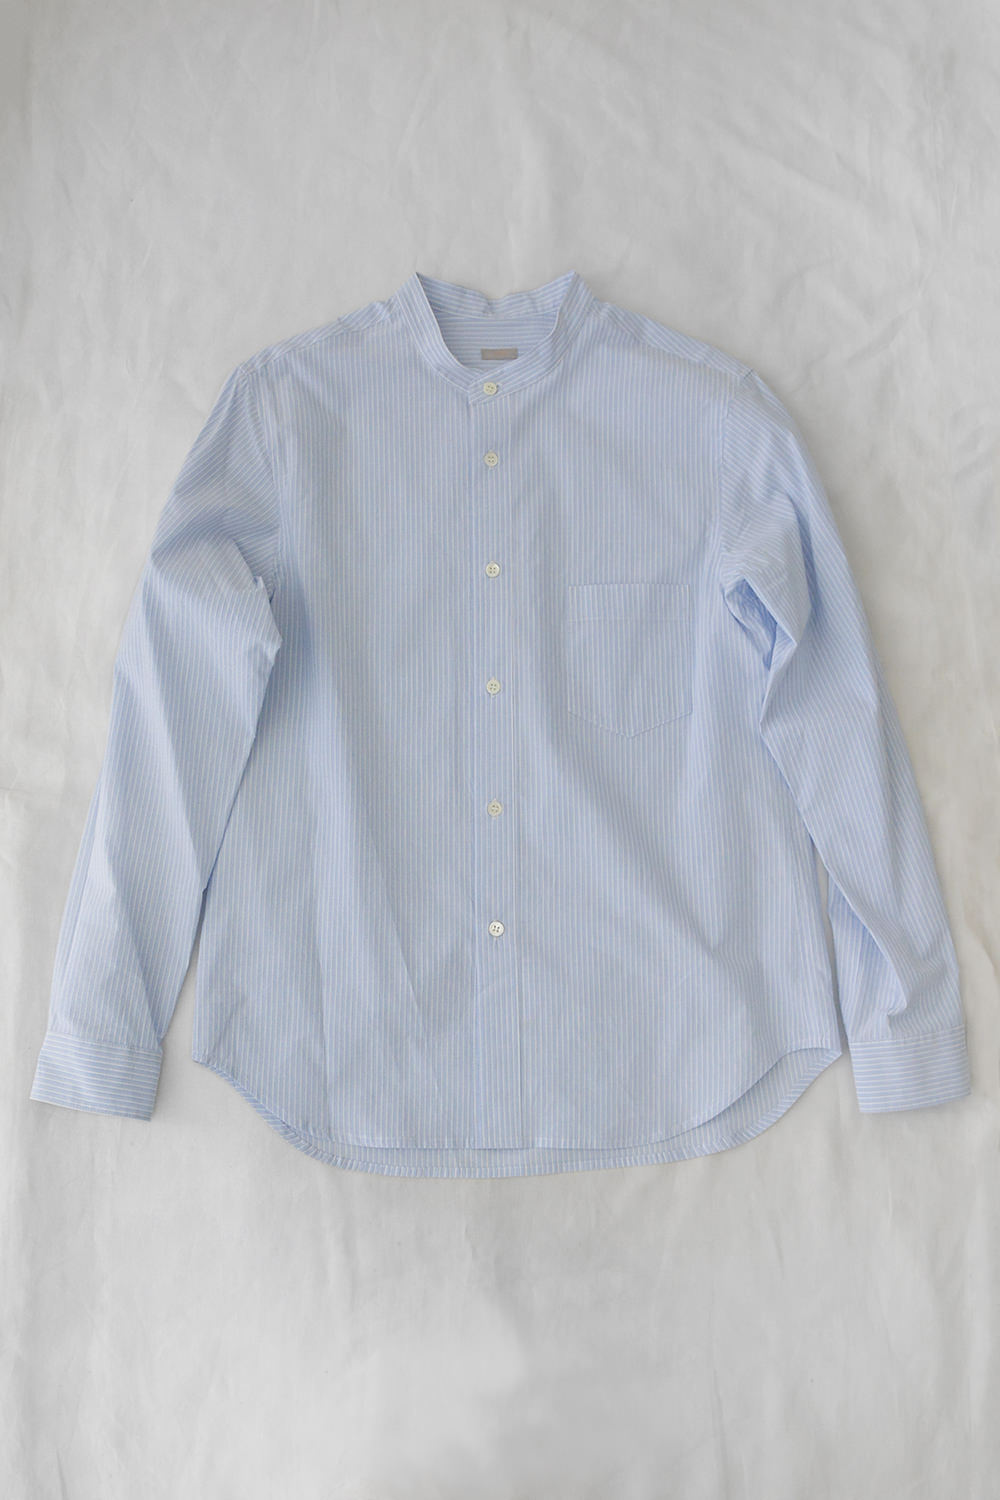 Stand Collar Shirt Blue Stripe Top Picture